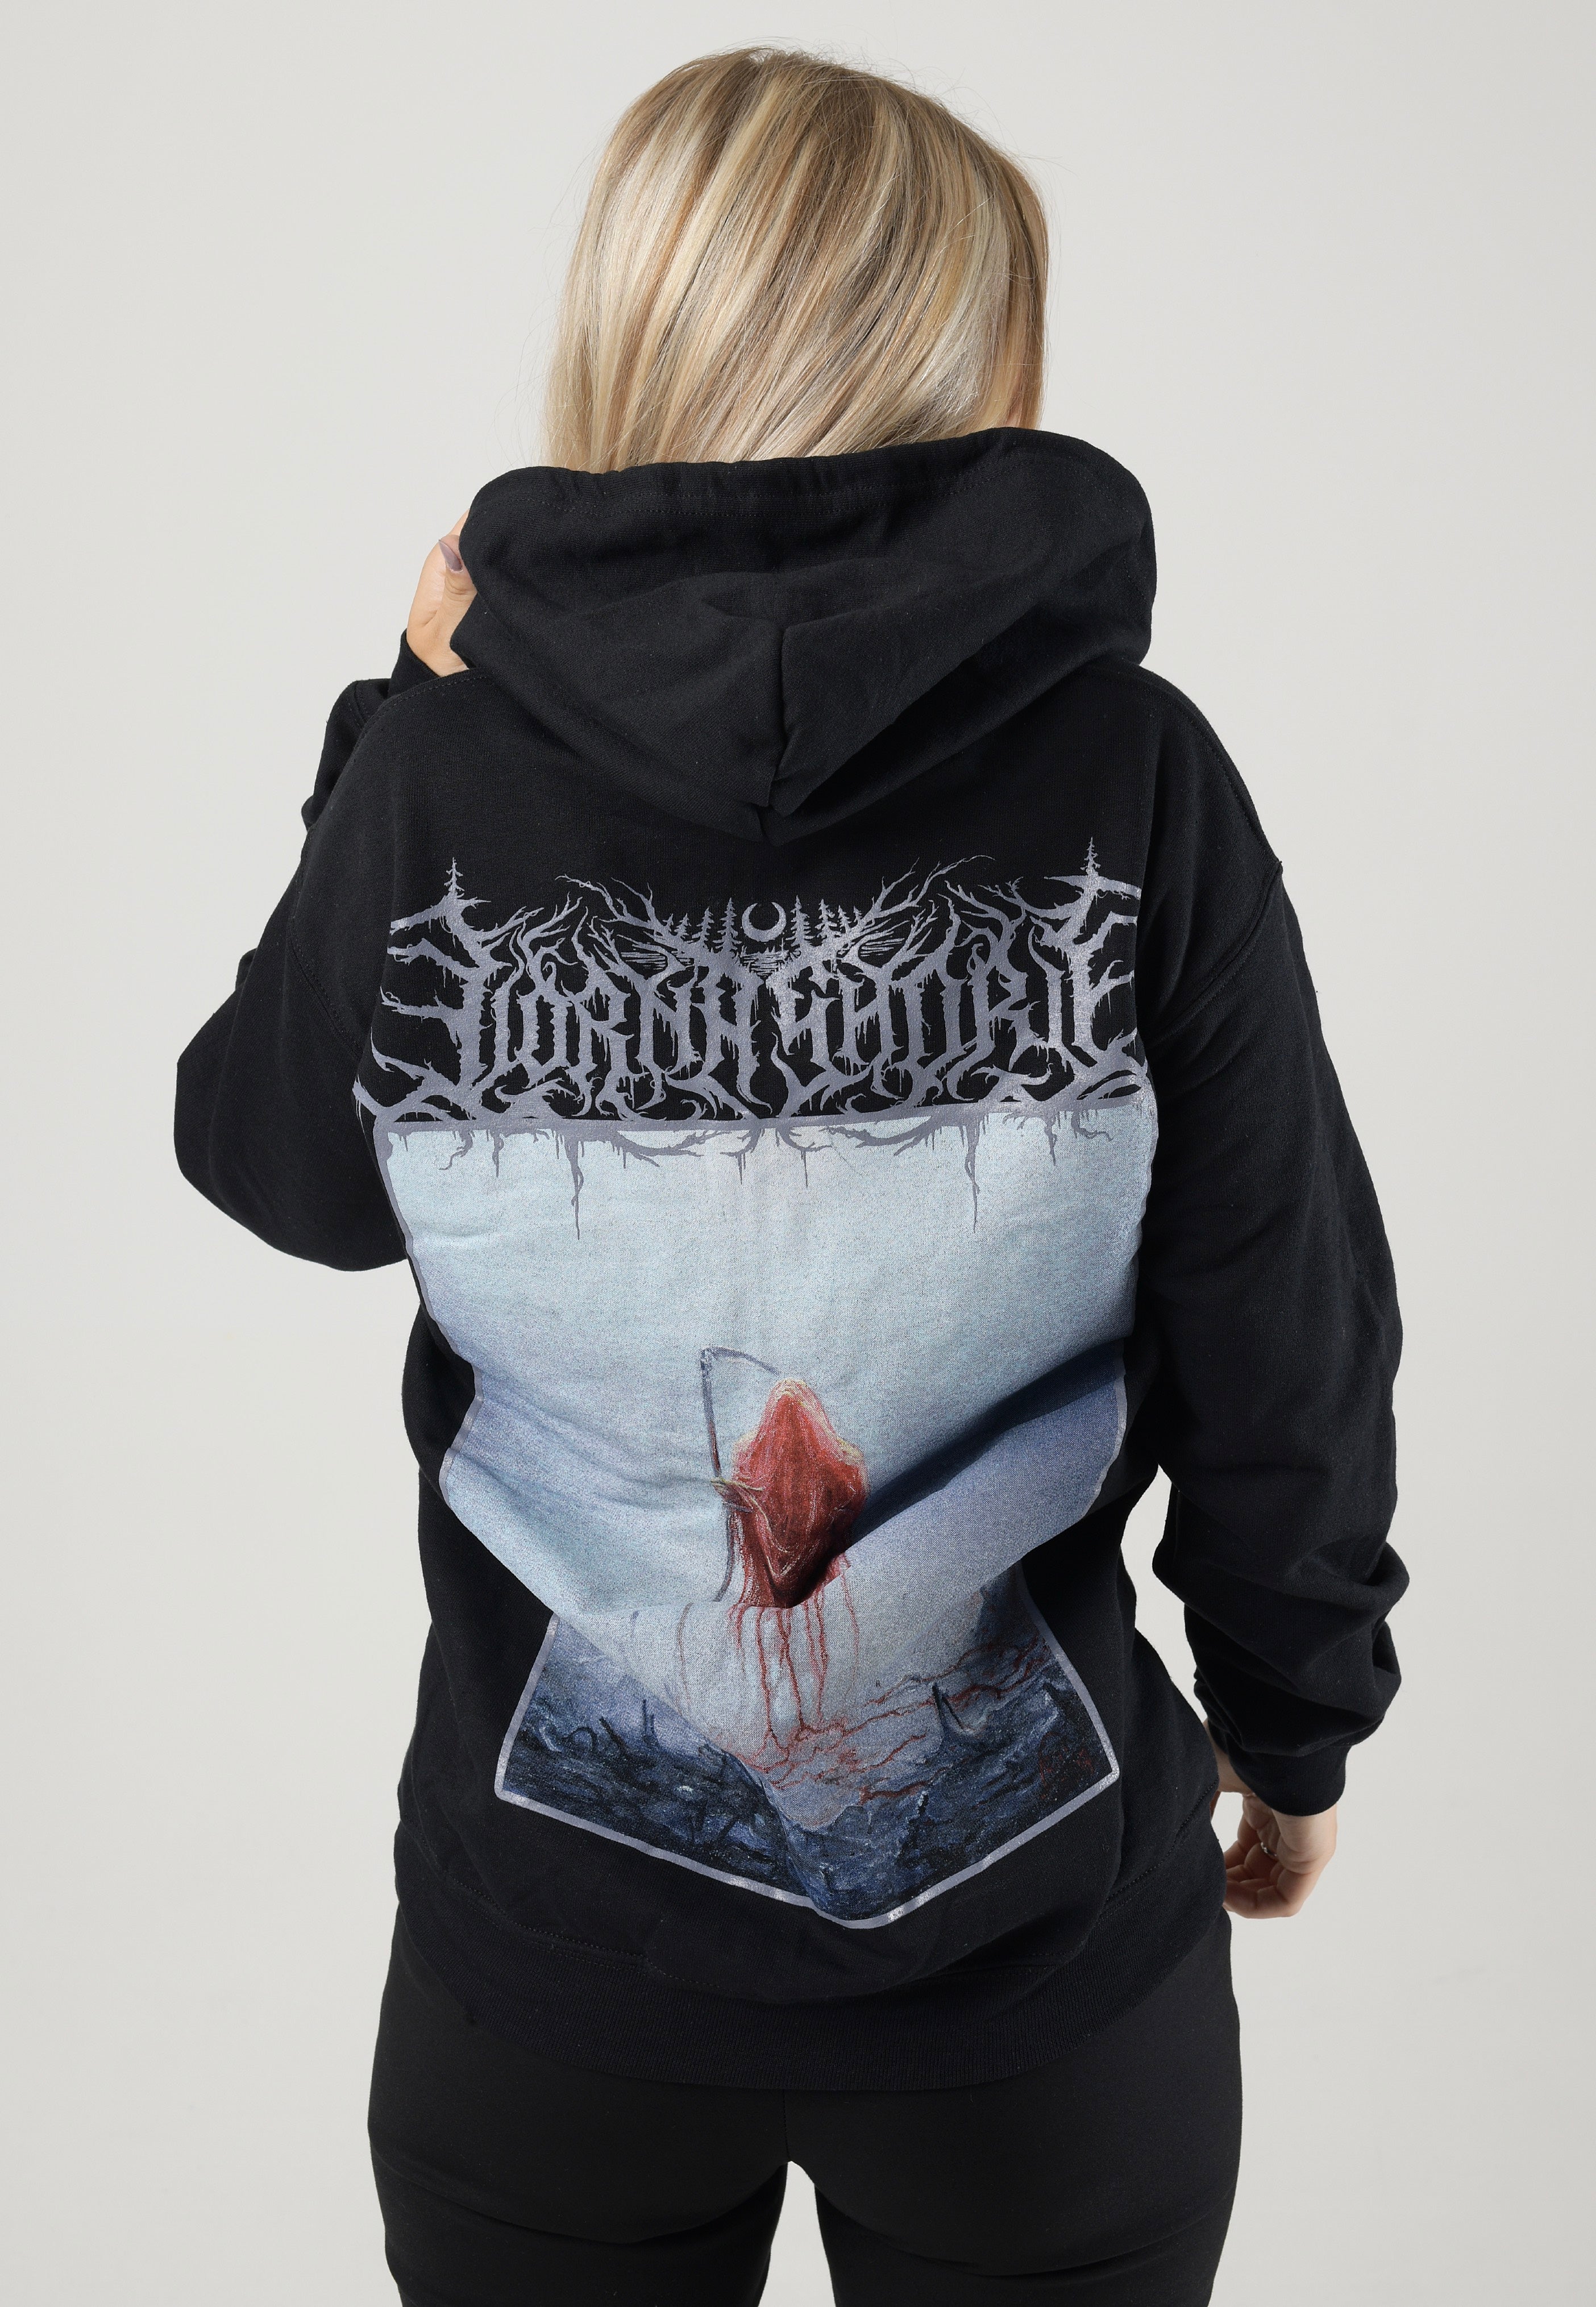 Lorna Shore - And I Return To Nothingness Cover - Zipper | Women-Image